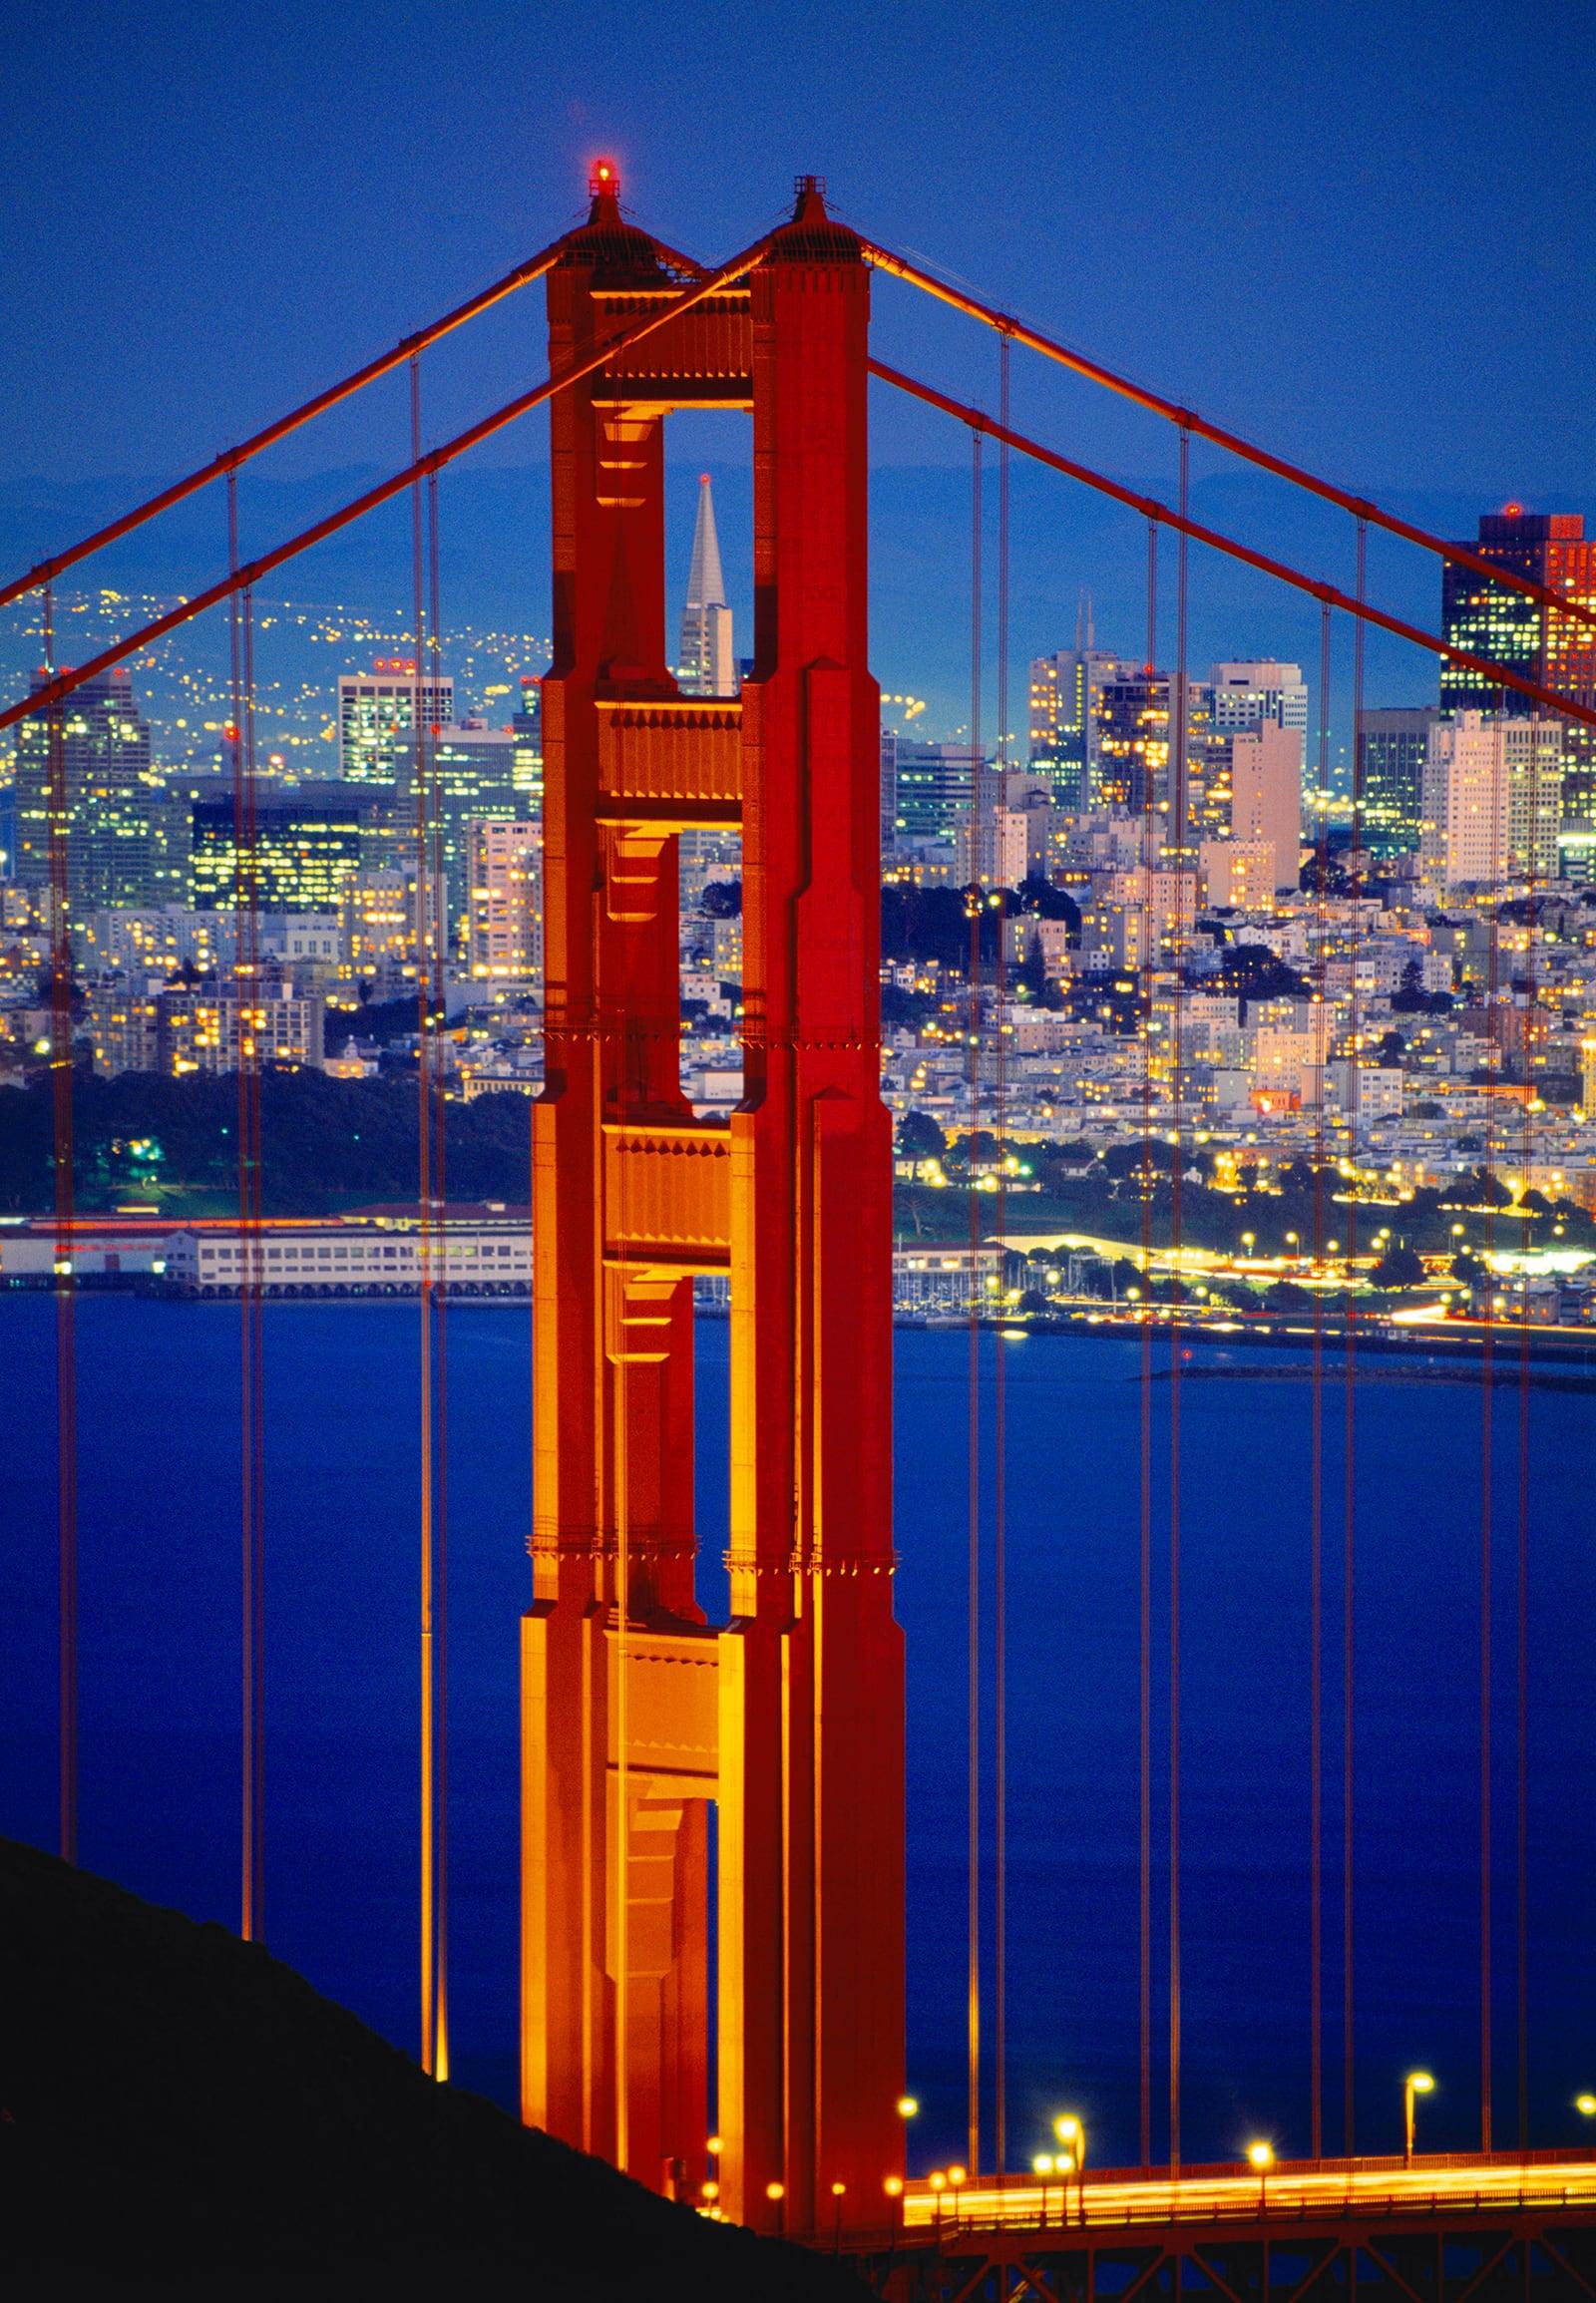 Close up of one of the Golden Gate Bridge towers at night with San Francisco lit up in the background